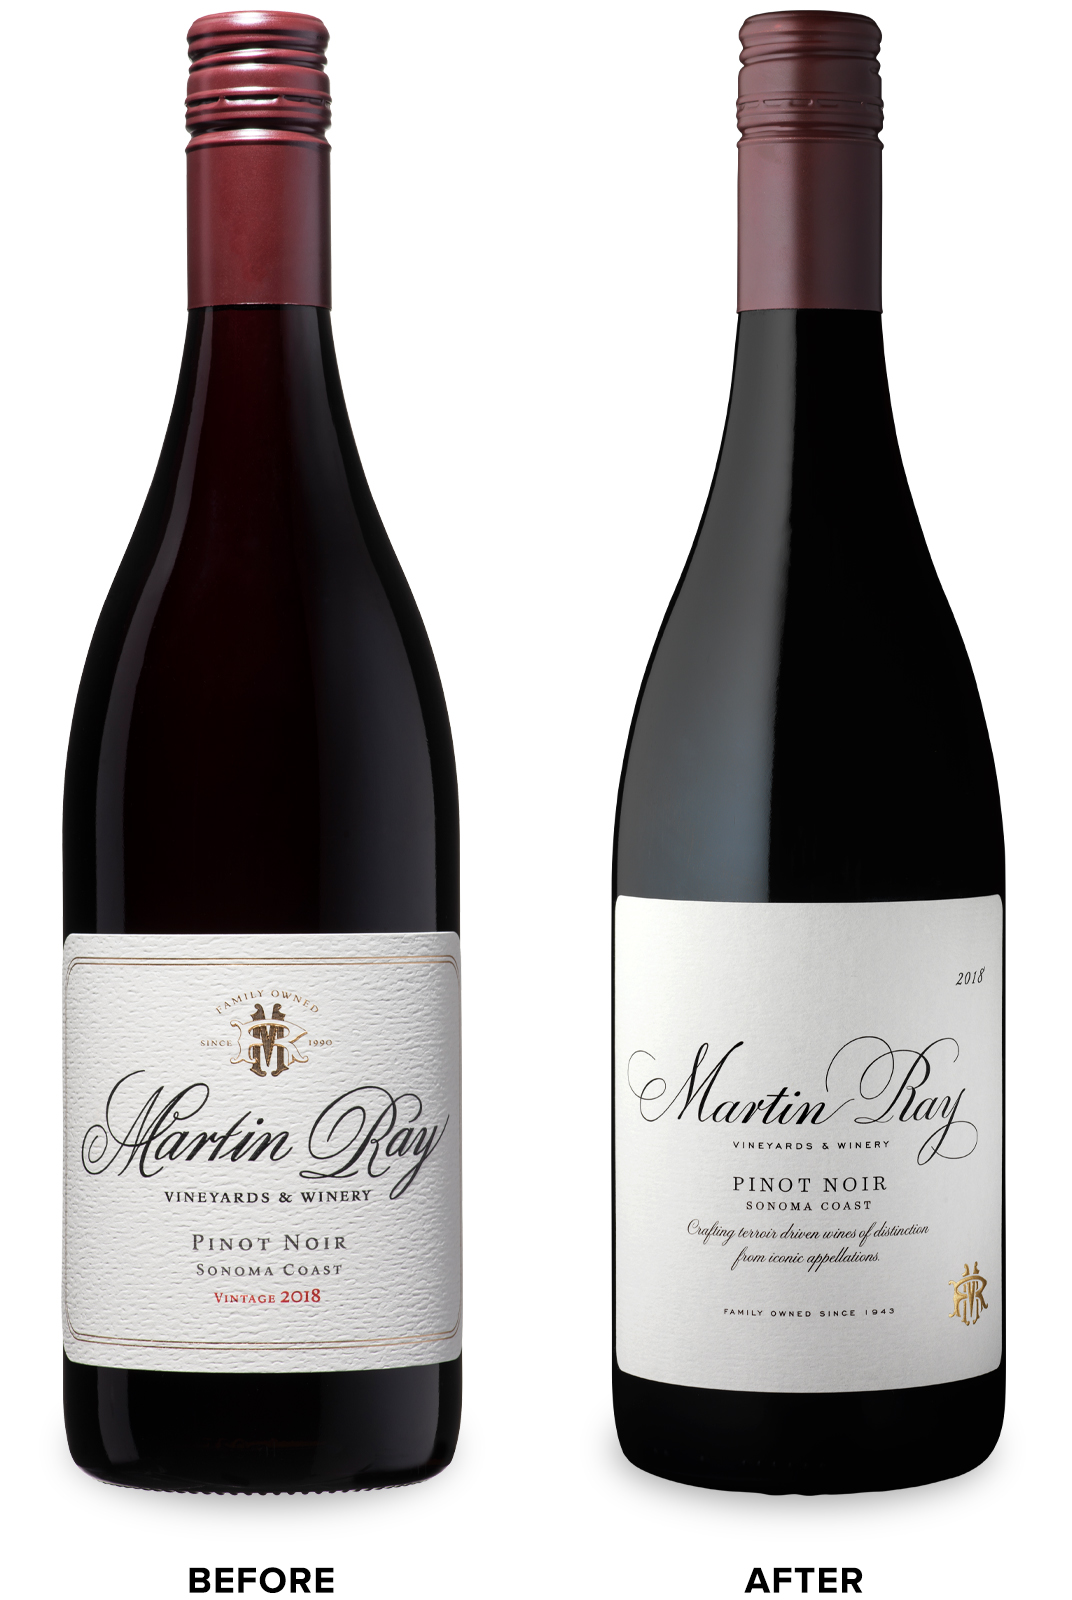 Martin Ray Vineyards & Winery Core Tier Wine Packaging Before Redesign on Left & After on Right